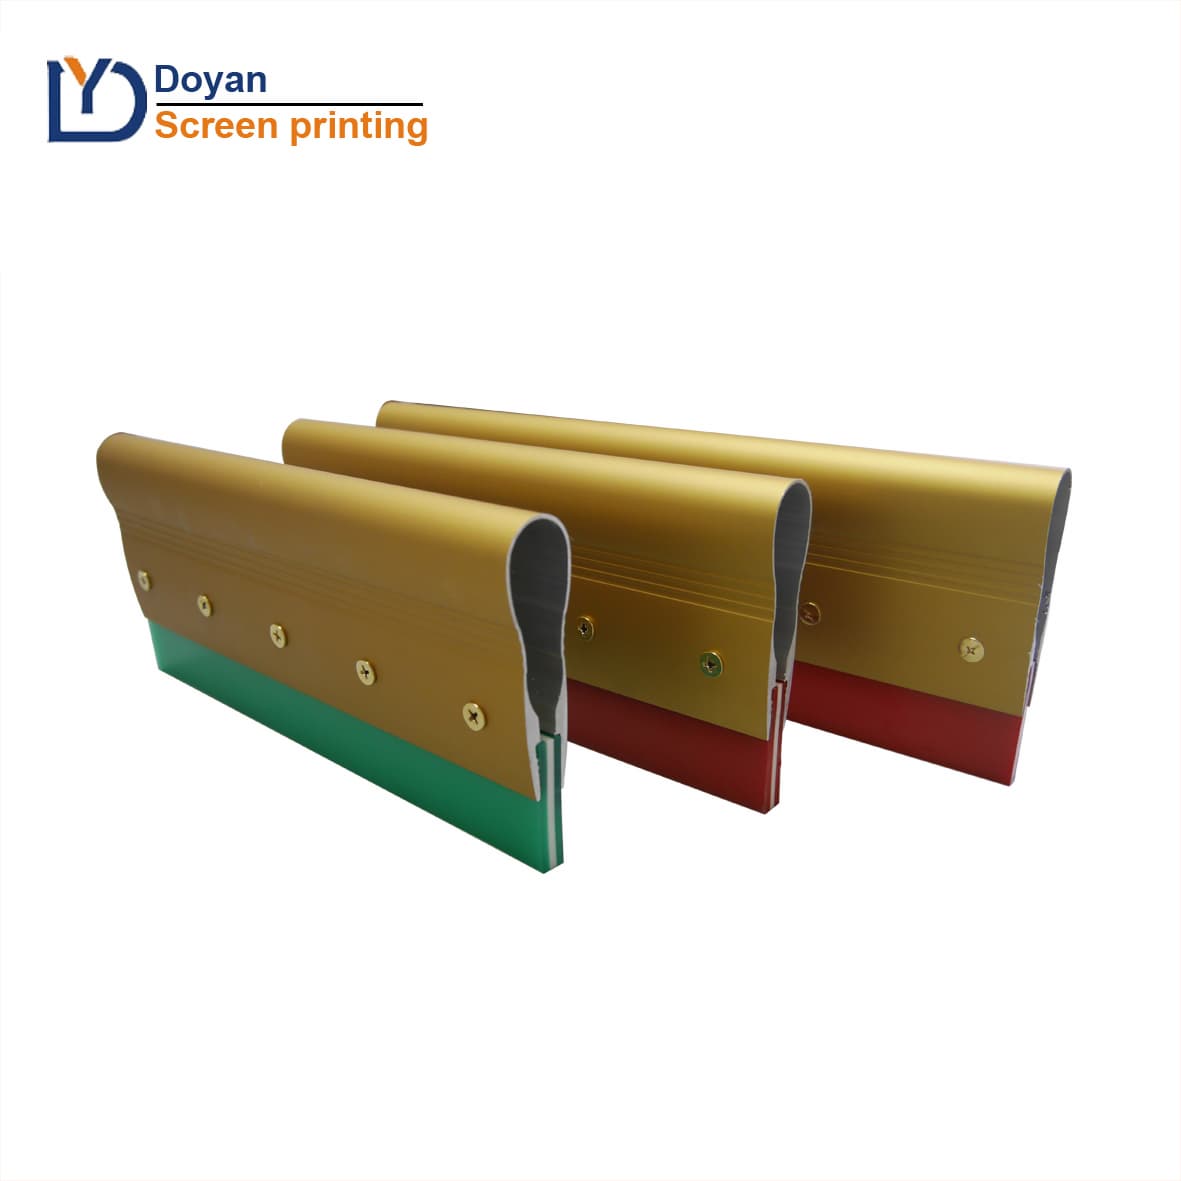 Aluminum handle with squeegee for screen printing